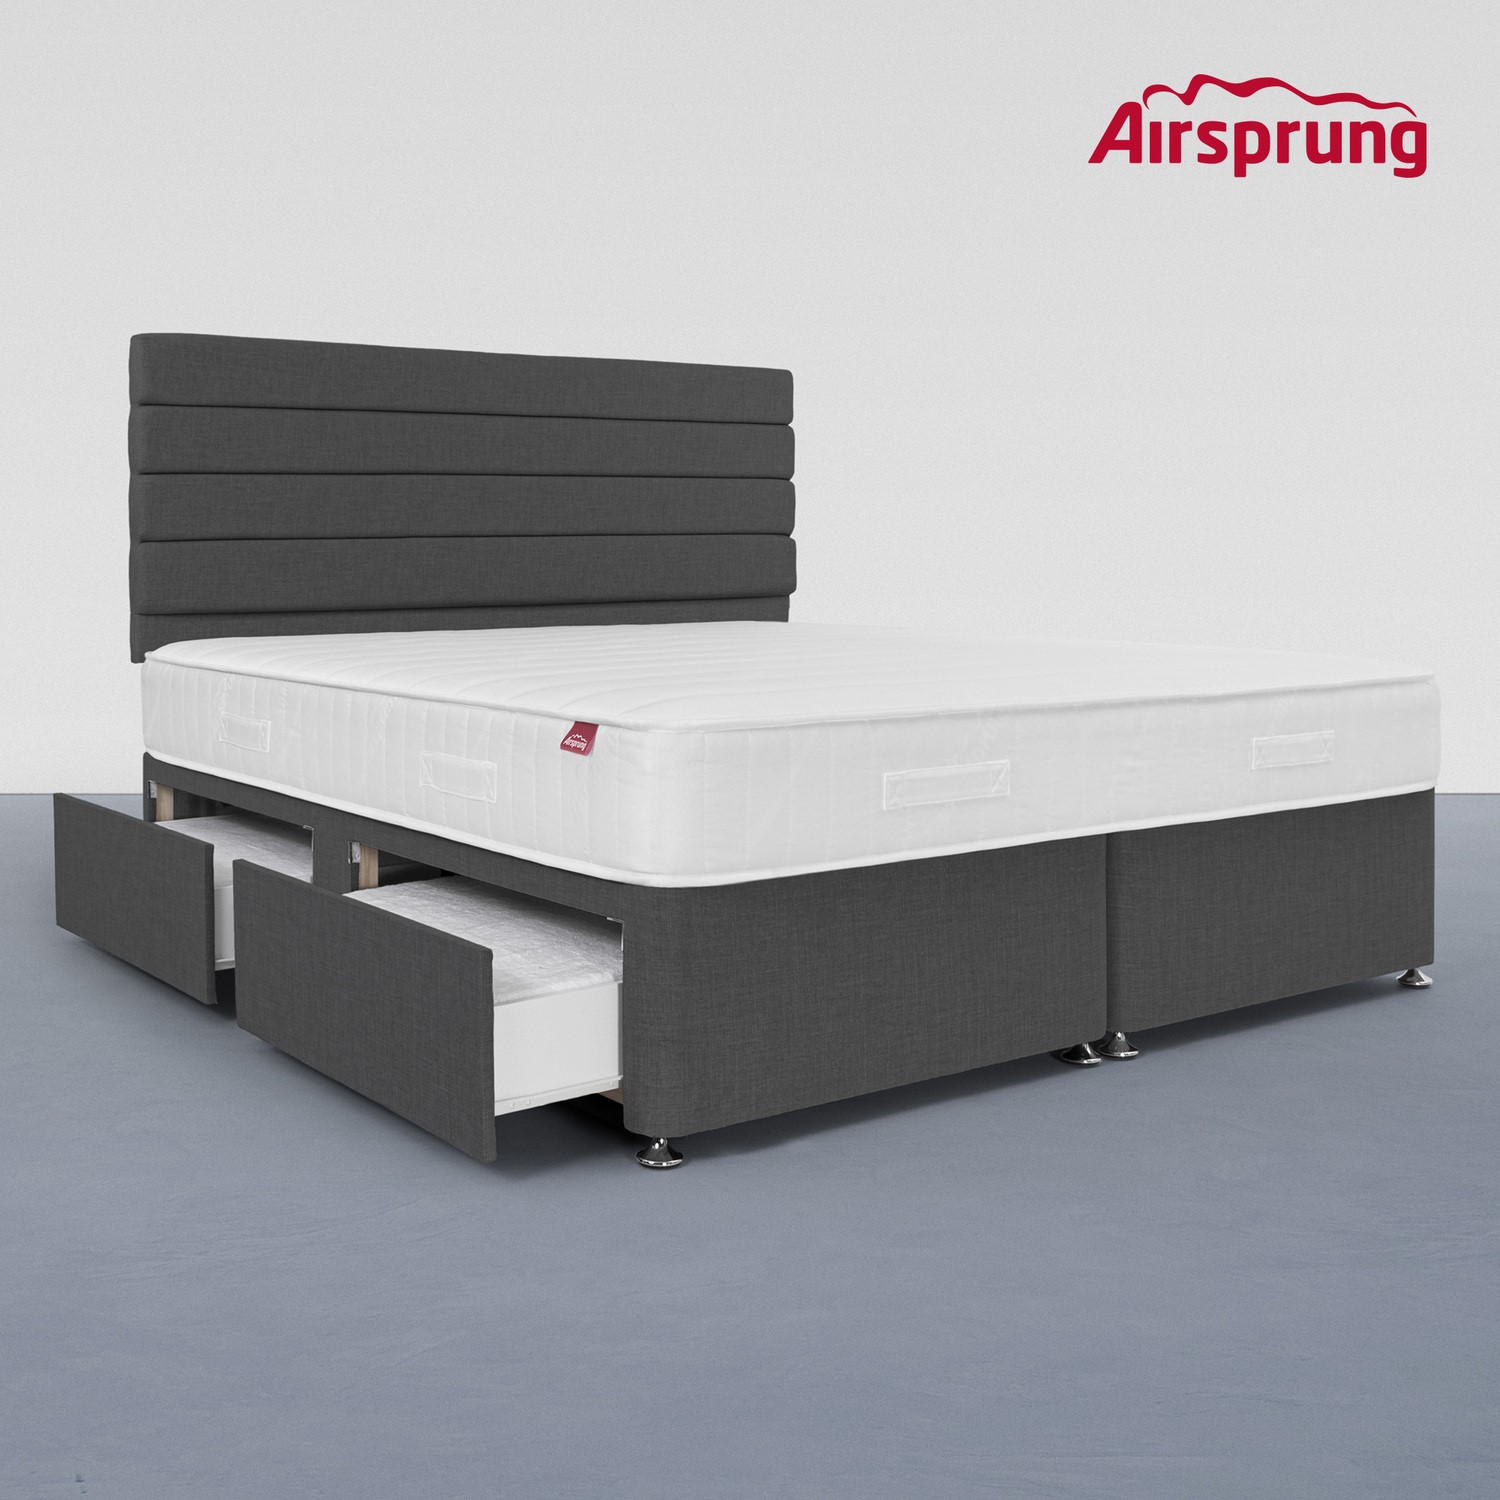 Read more about Airsprung super king 4 drawer divan bed with comfort mattress charcoal